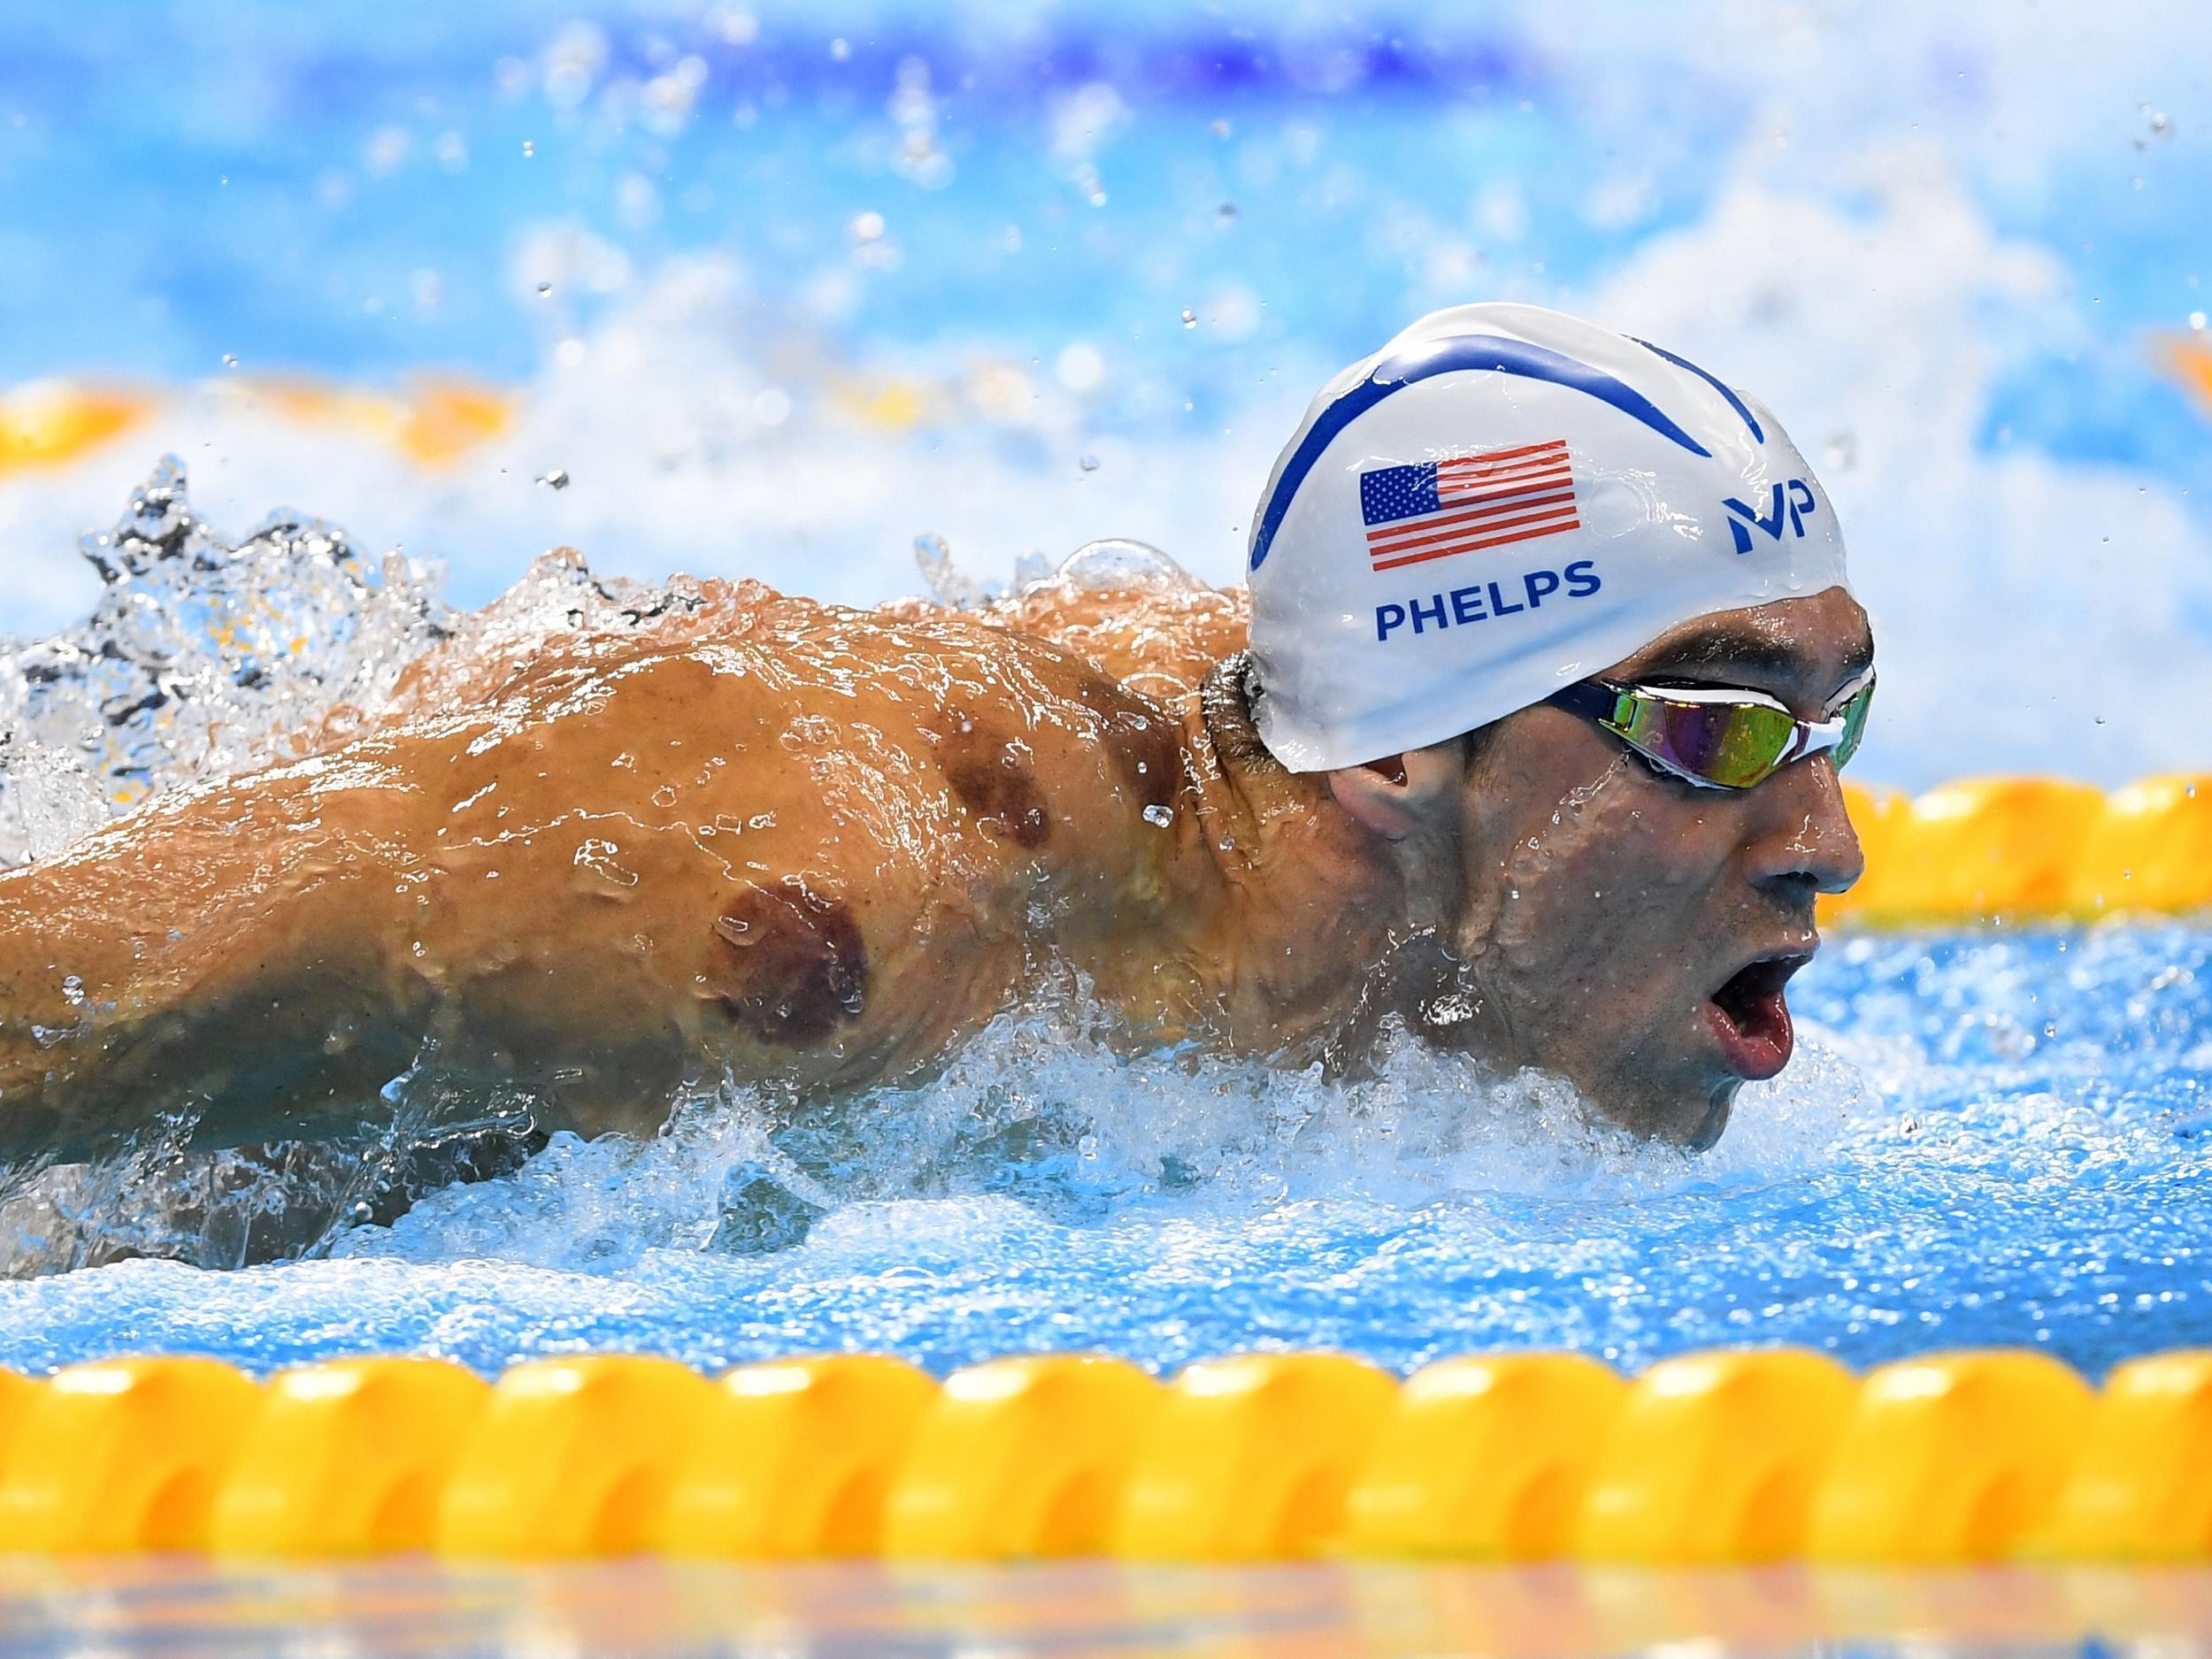 Since Michael Phelps seized his 19th gold medal on Sunday, interest in cupping has spiked